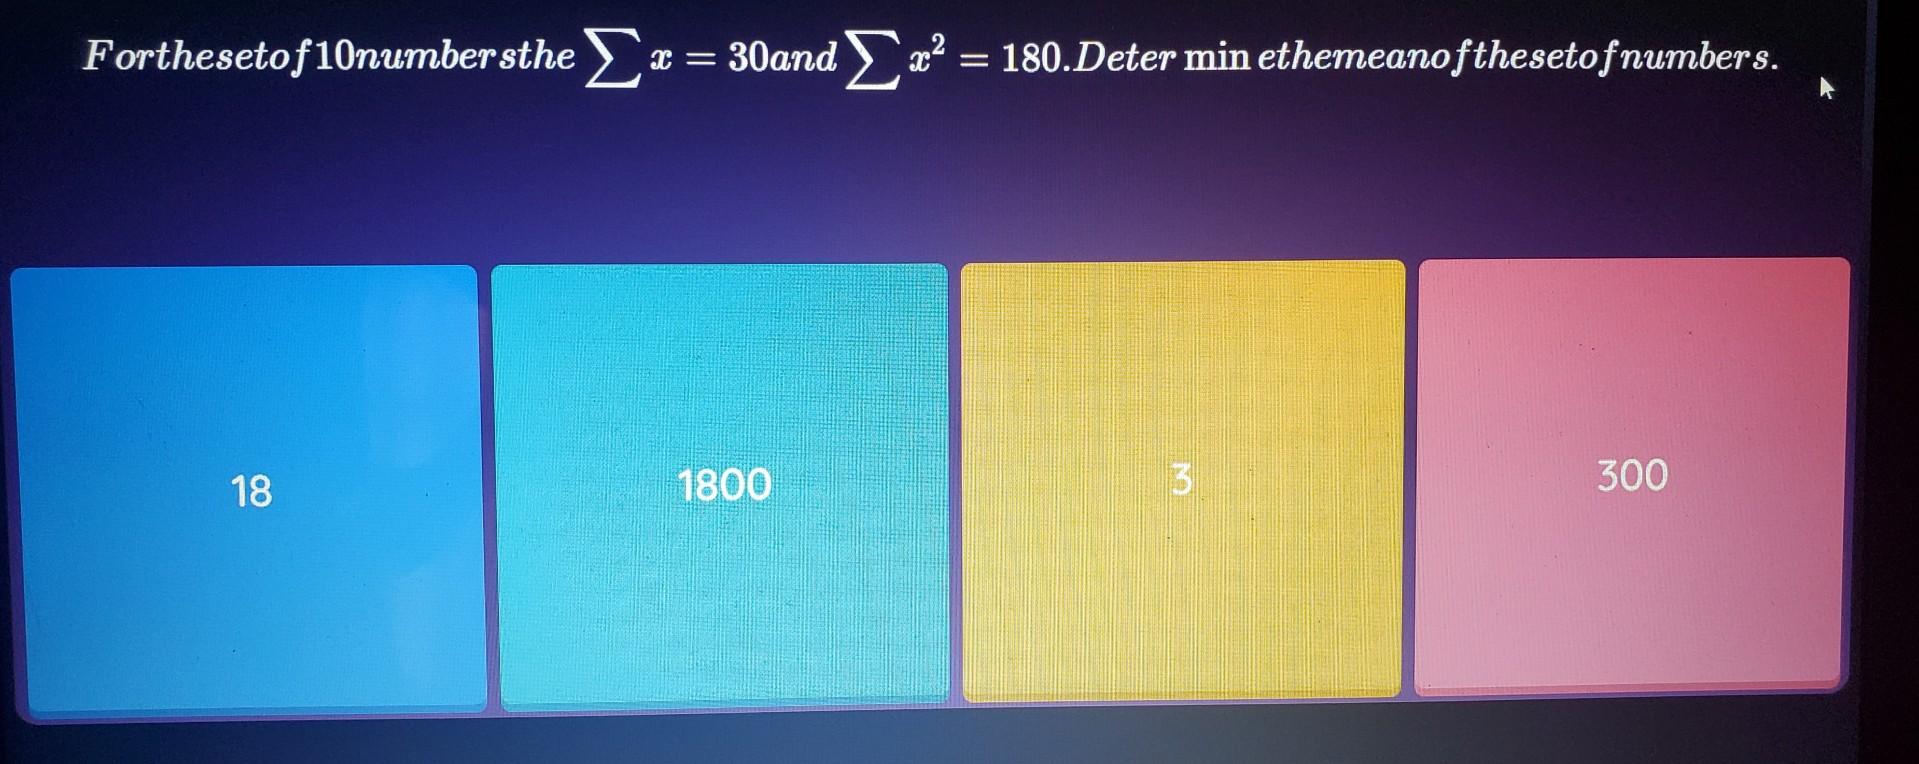 Solved Forthesetof 10 numbersthe ∑x=30 and ∑x2=180.Deter min | Chegg.com